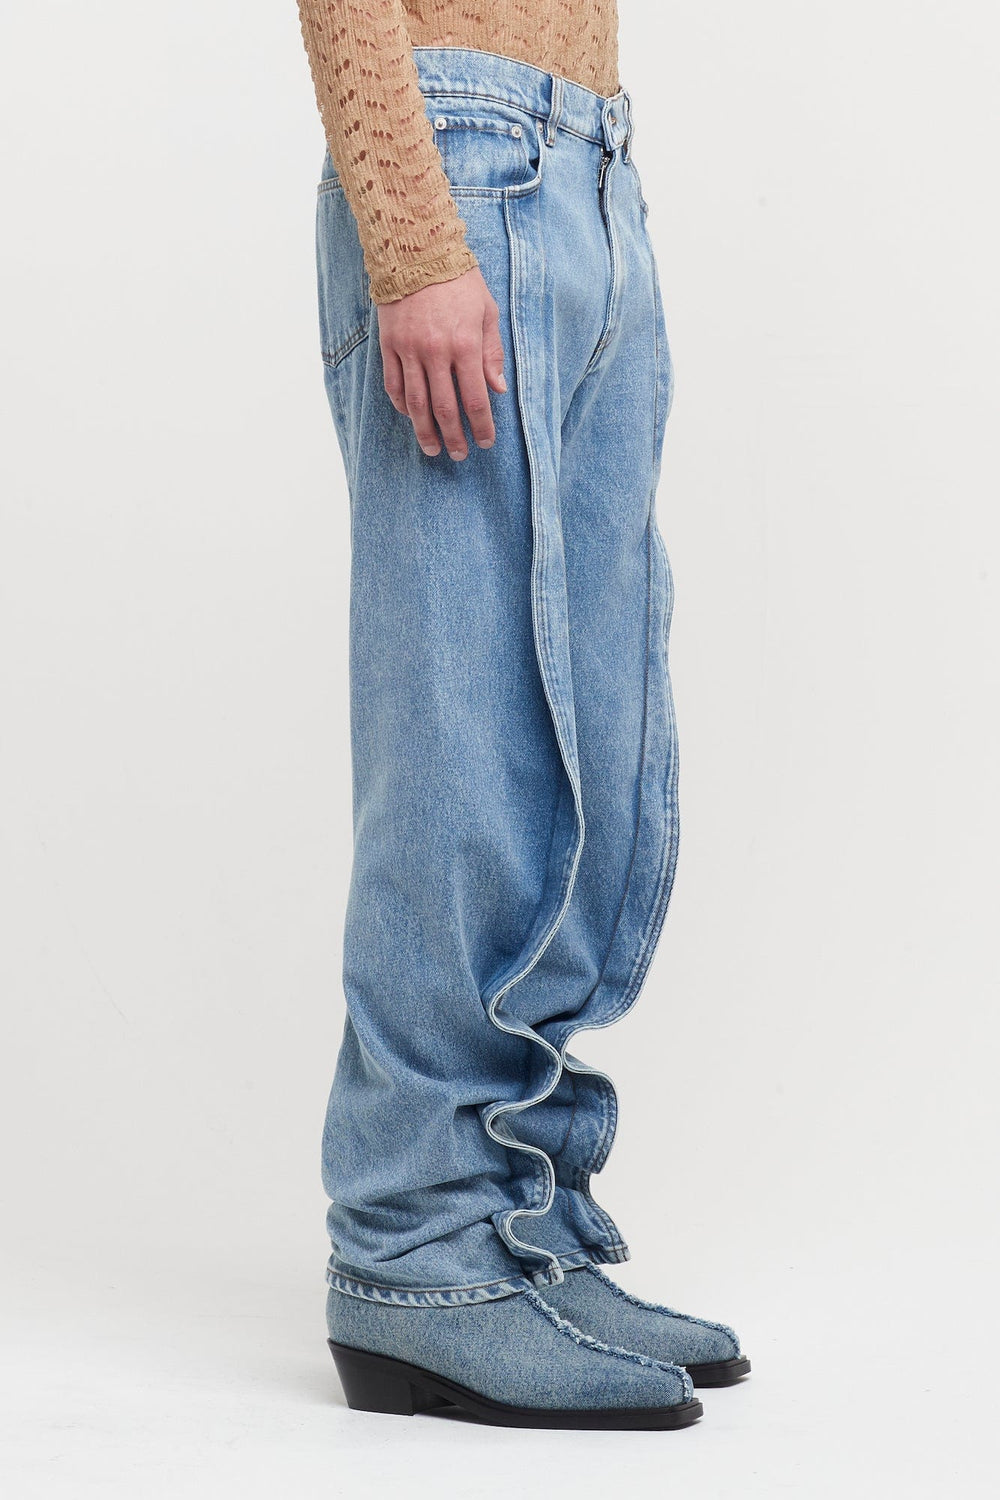 Y/Project Slim Banana Jeans in Blue – Antidote Fashion and Lifestyle